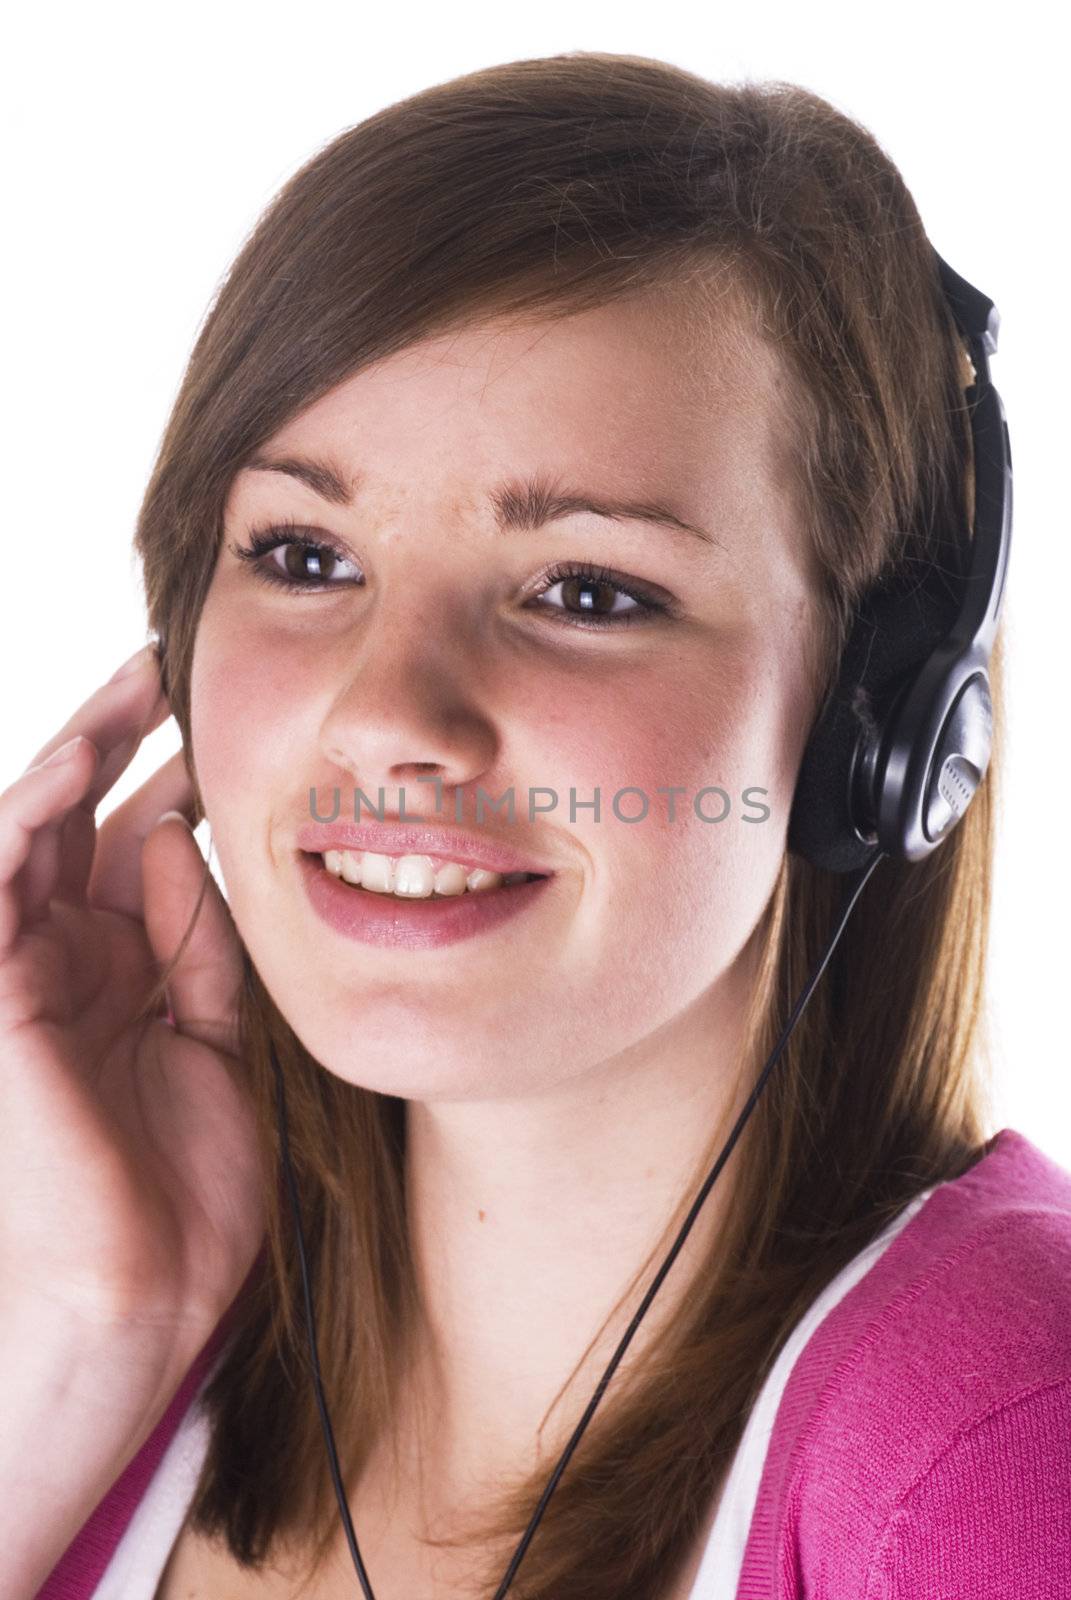 Teenage girl with headphone; isolated on a white background.